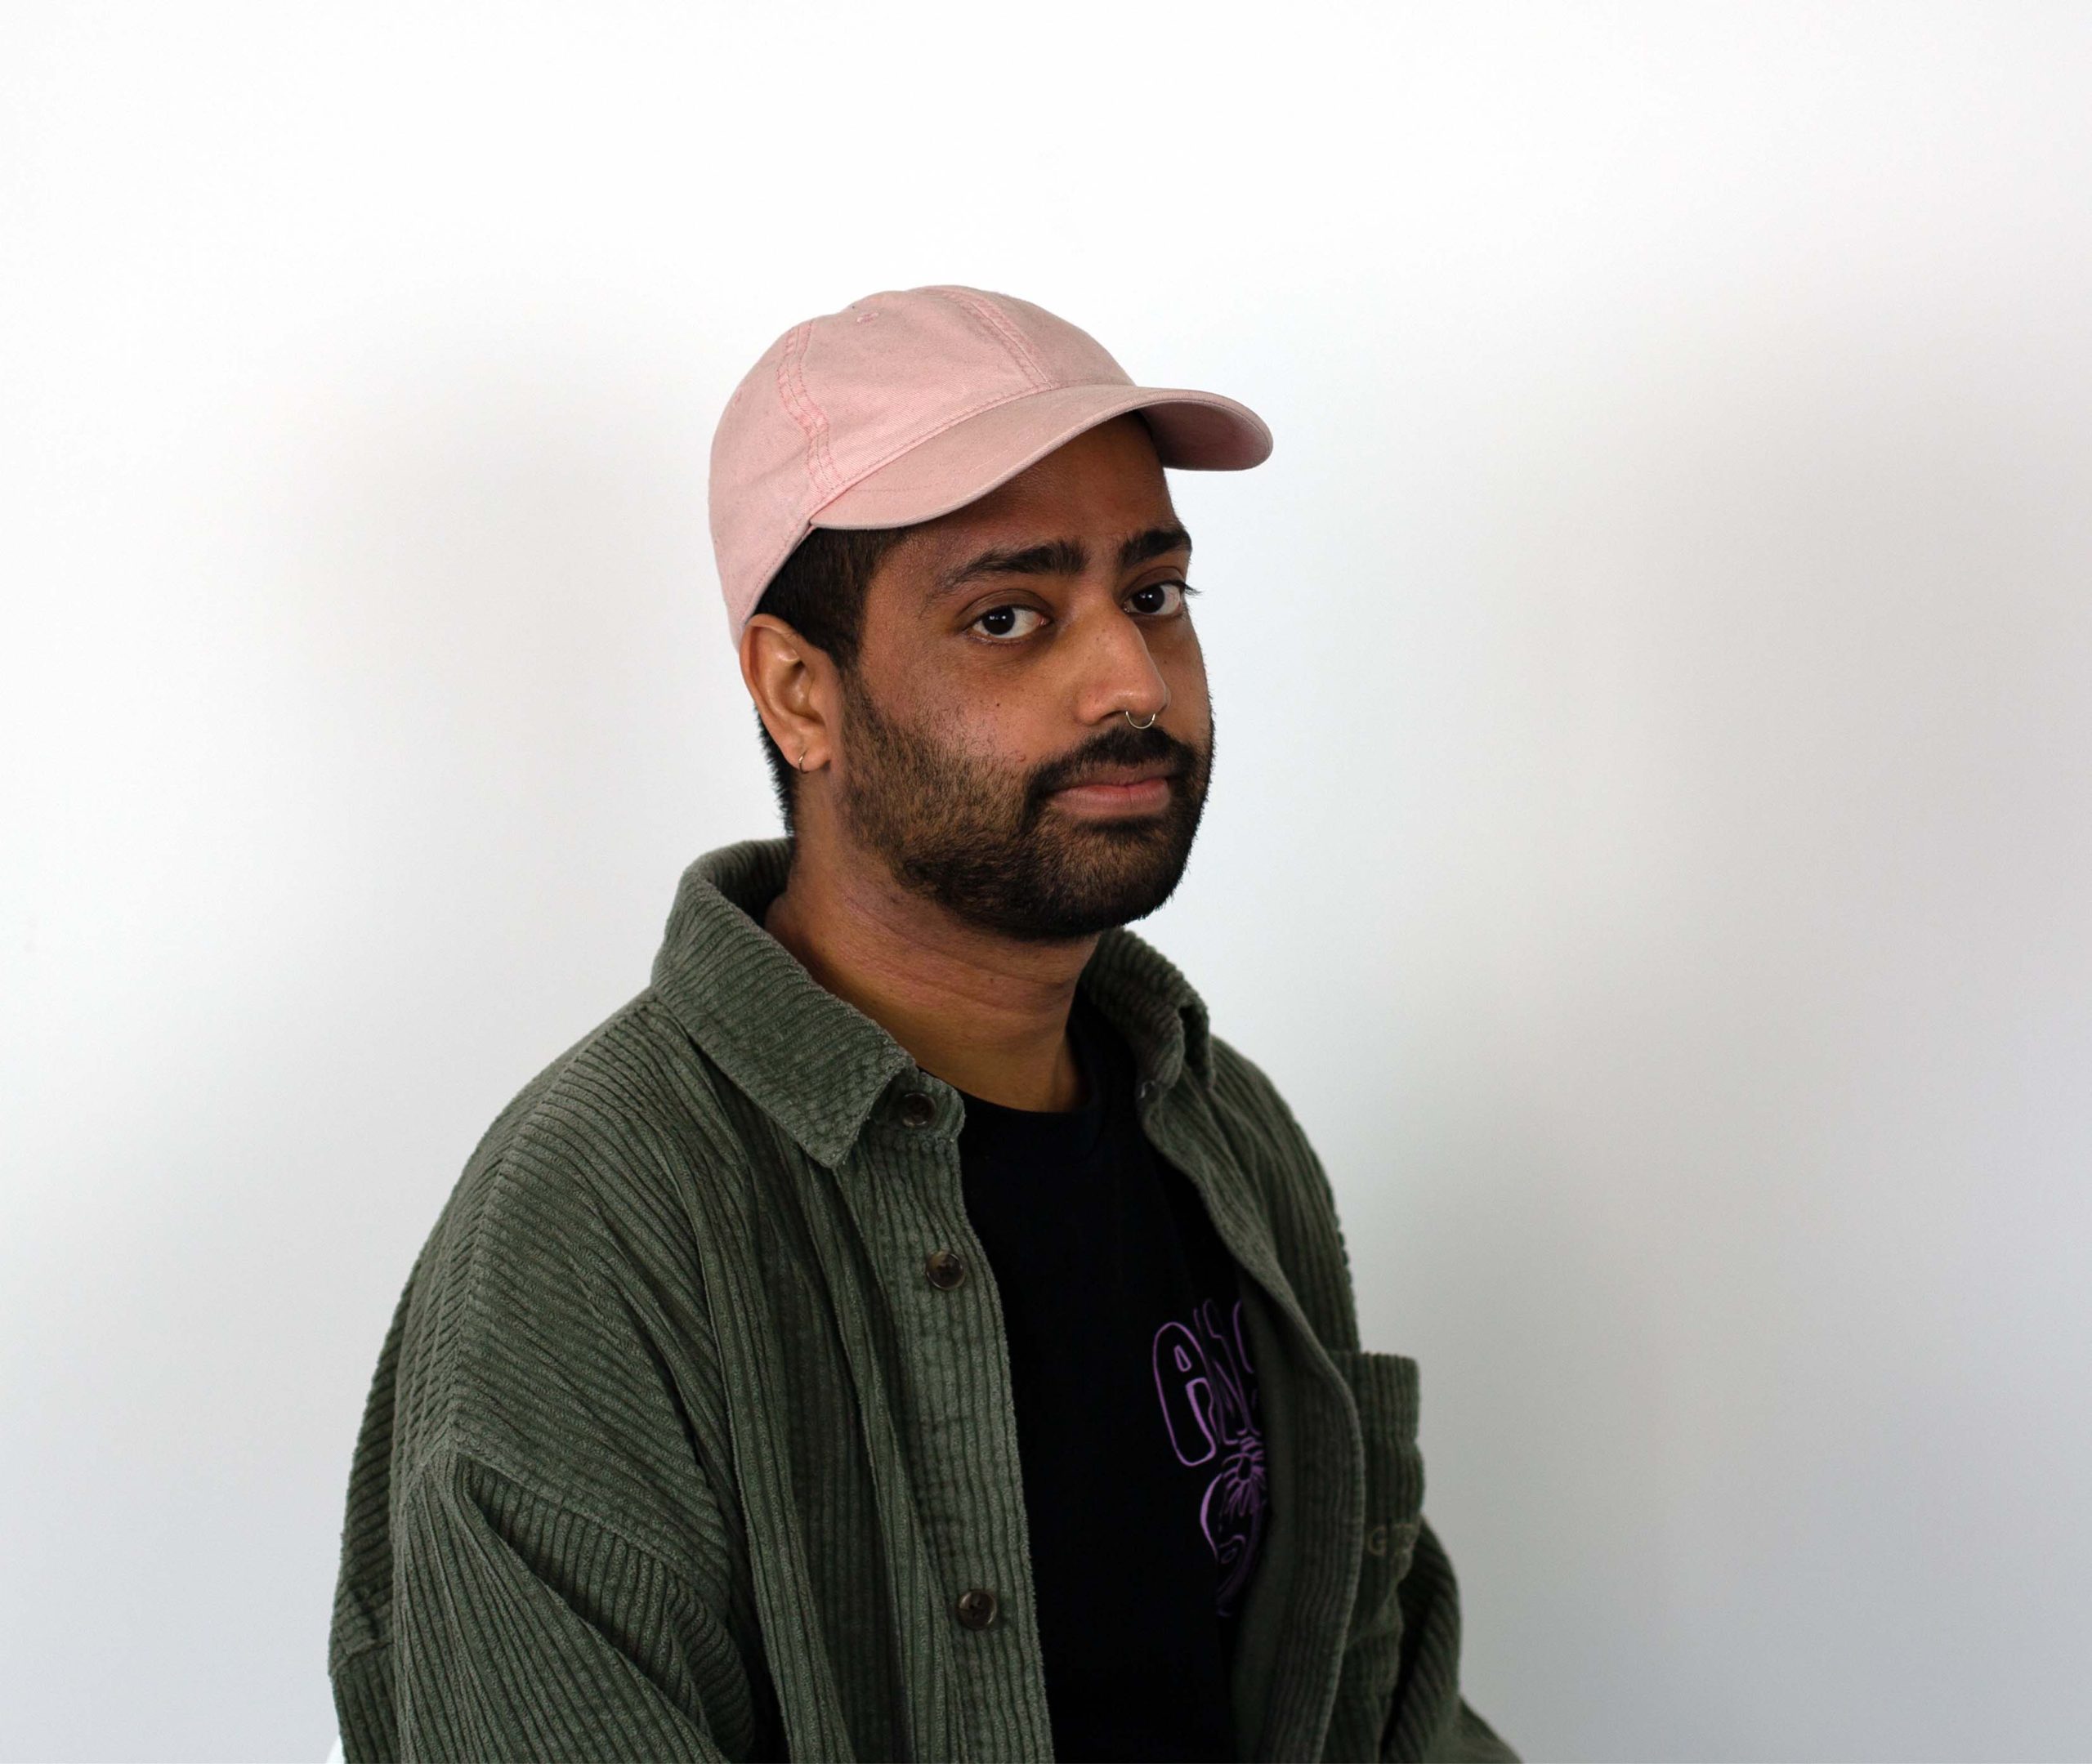 A headshot of Arjun, a Indian man with black stubble, a golden nose ring and pink hat wearing a green corduroy shirt over a.black t-shirt.